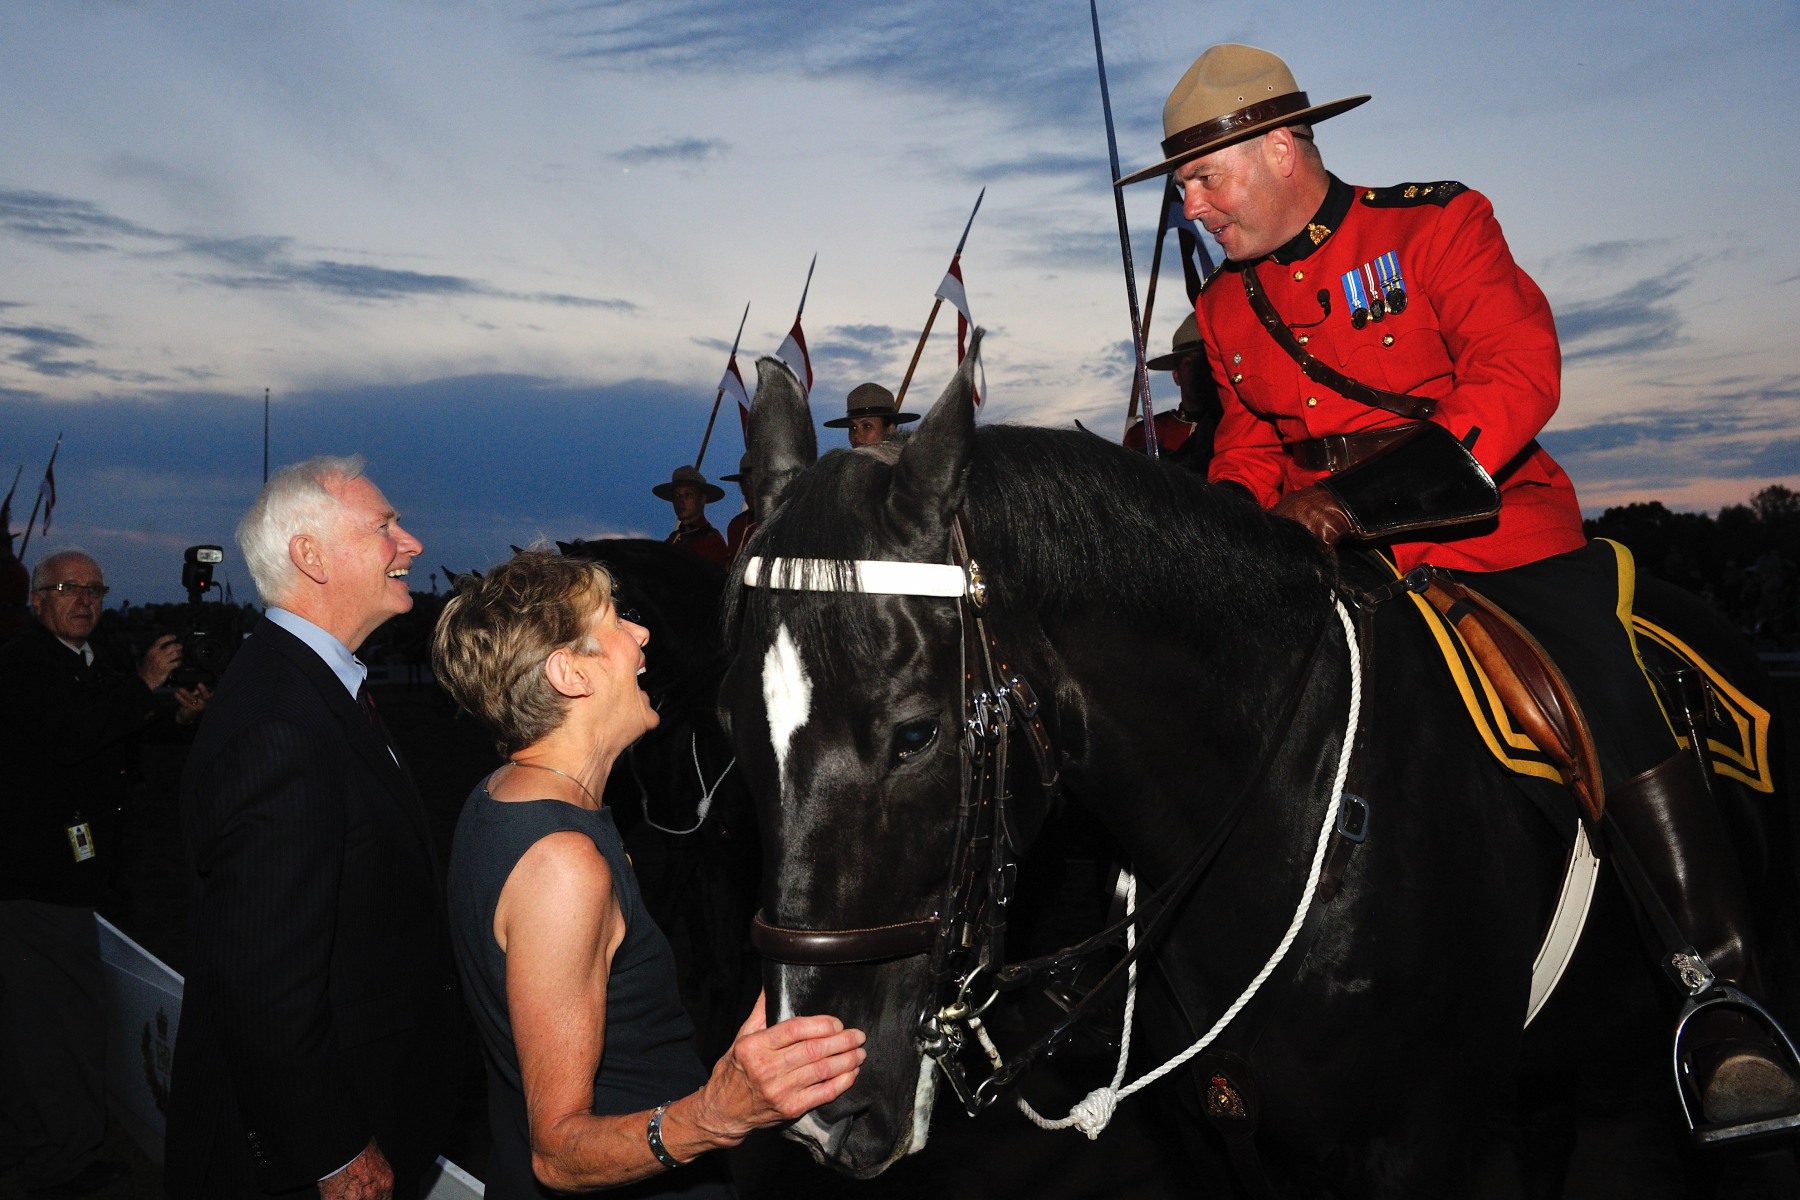 Their Excellencies congratulated Superintendent Marty Chesser on the Musical Ride's spectacular performence. 